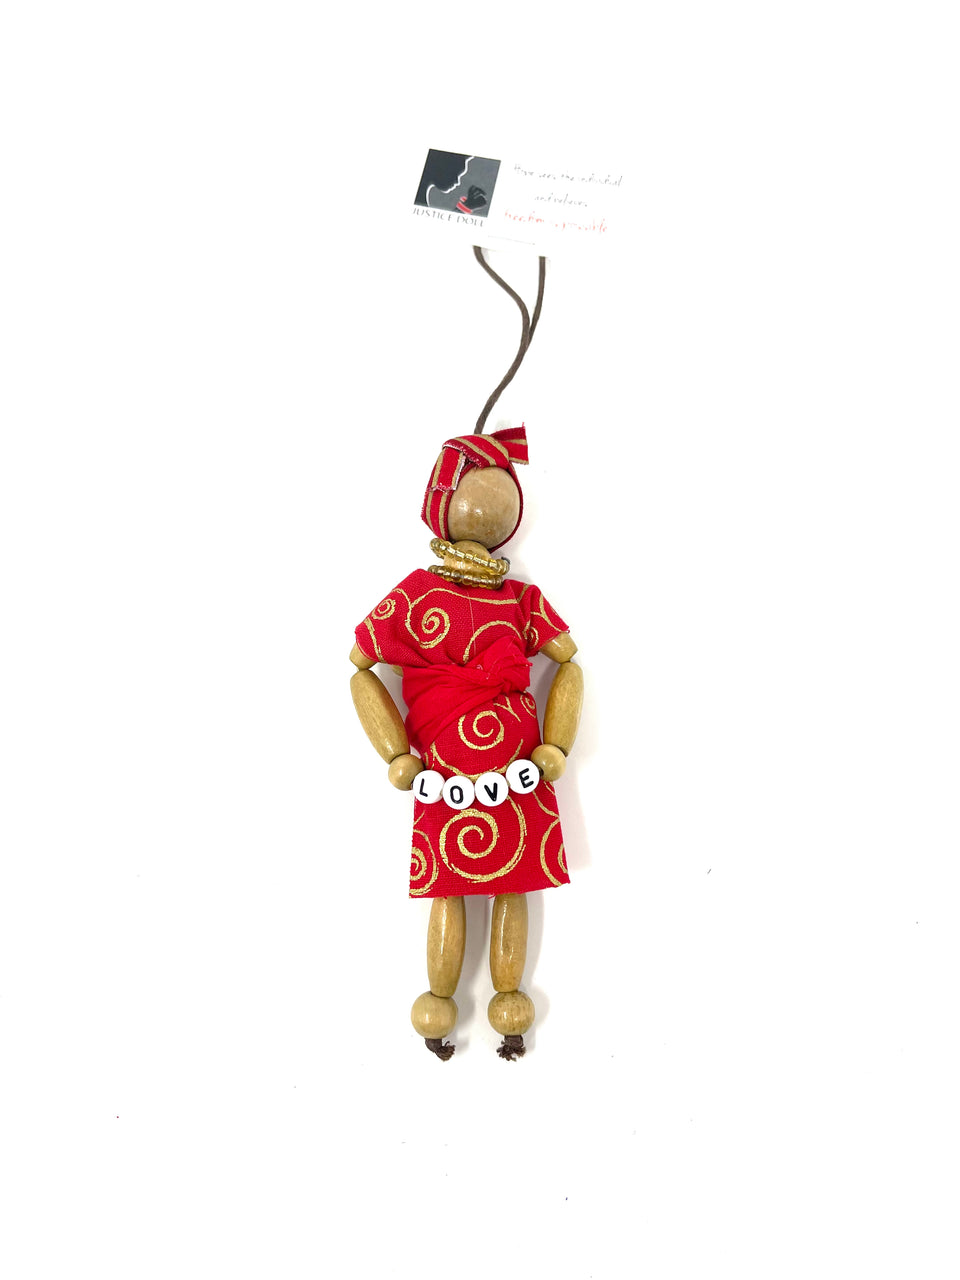 Justice Christmas Doll